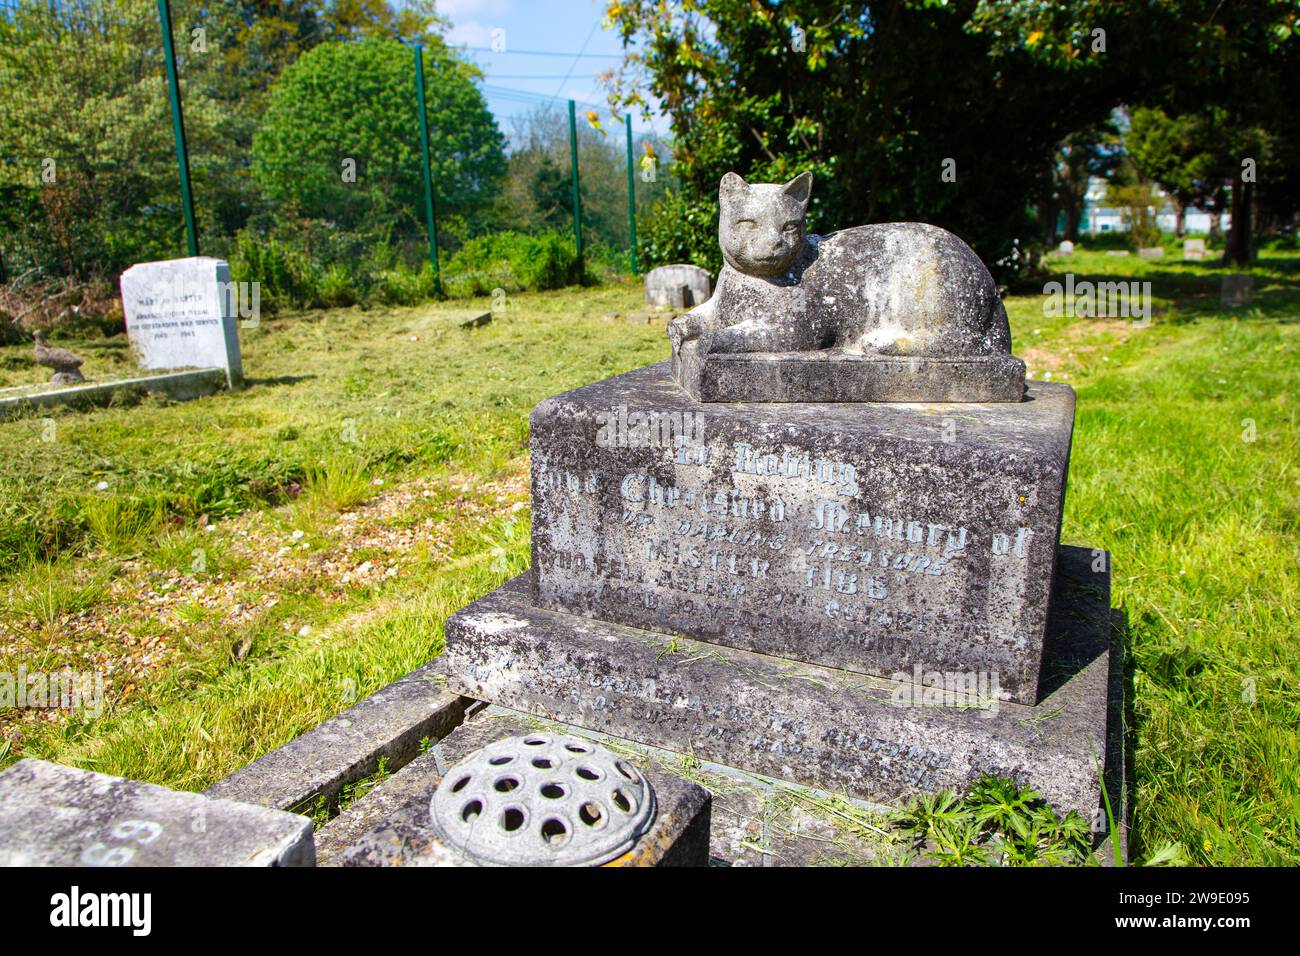 Funerary monument of a cat at the Ilford PDSA Animal Cemetery, Ilford, England Stock Photo